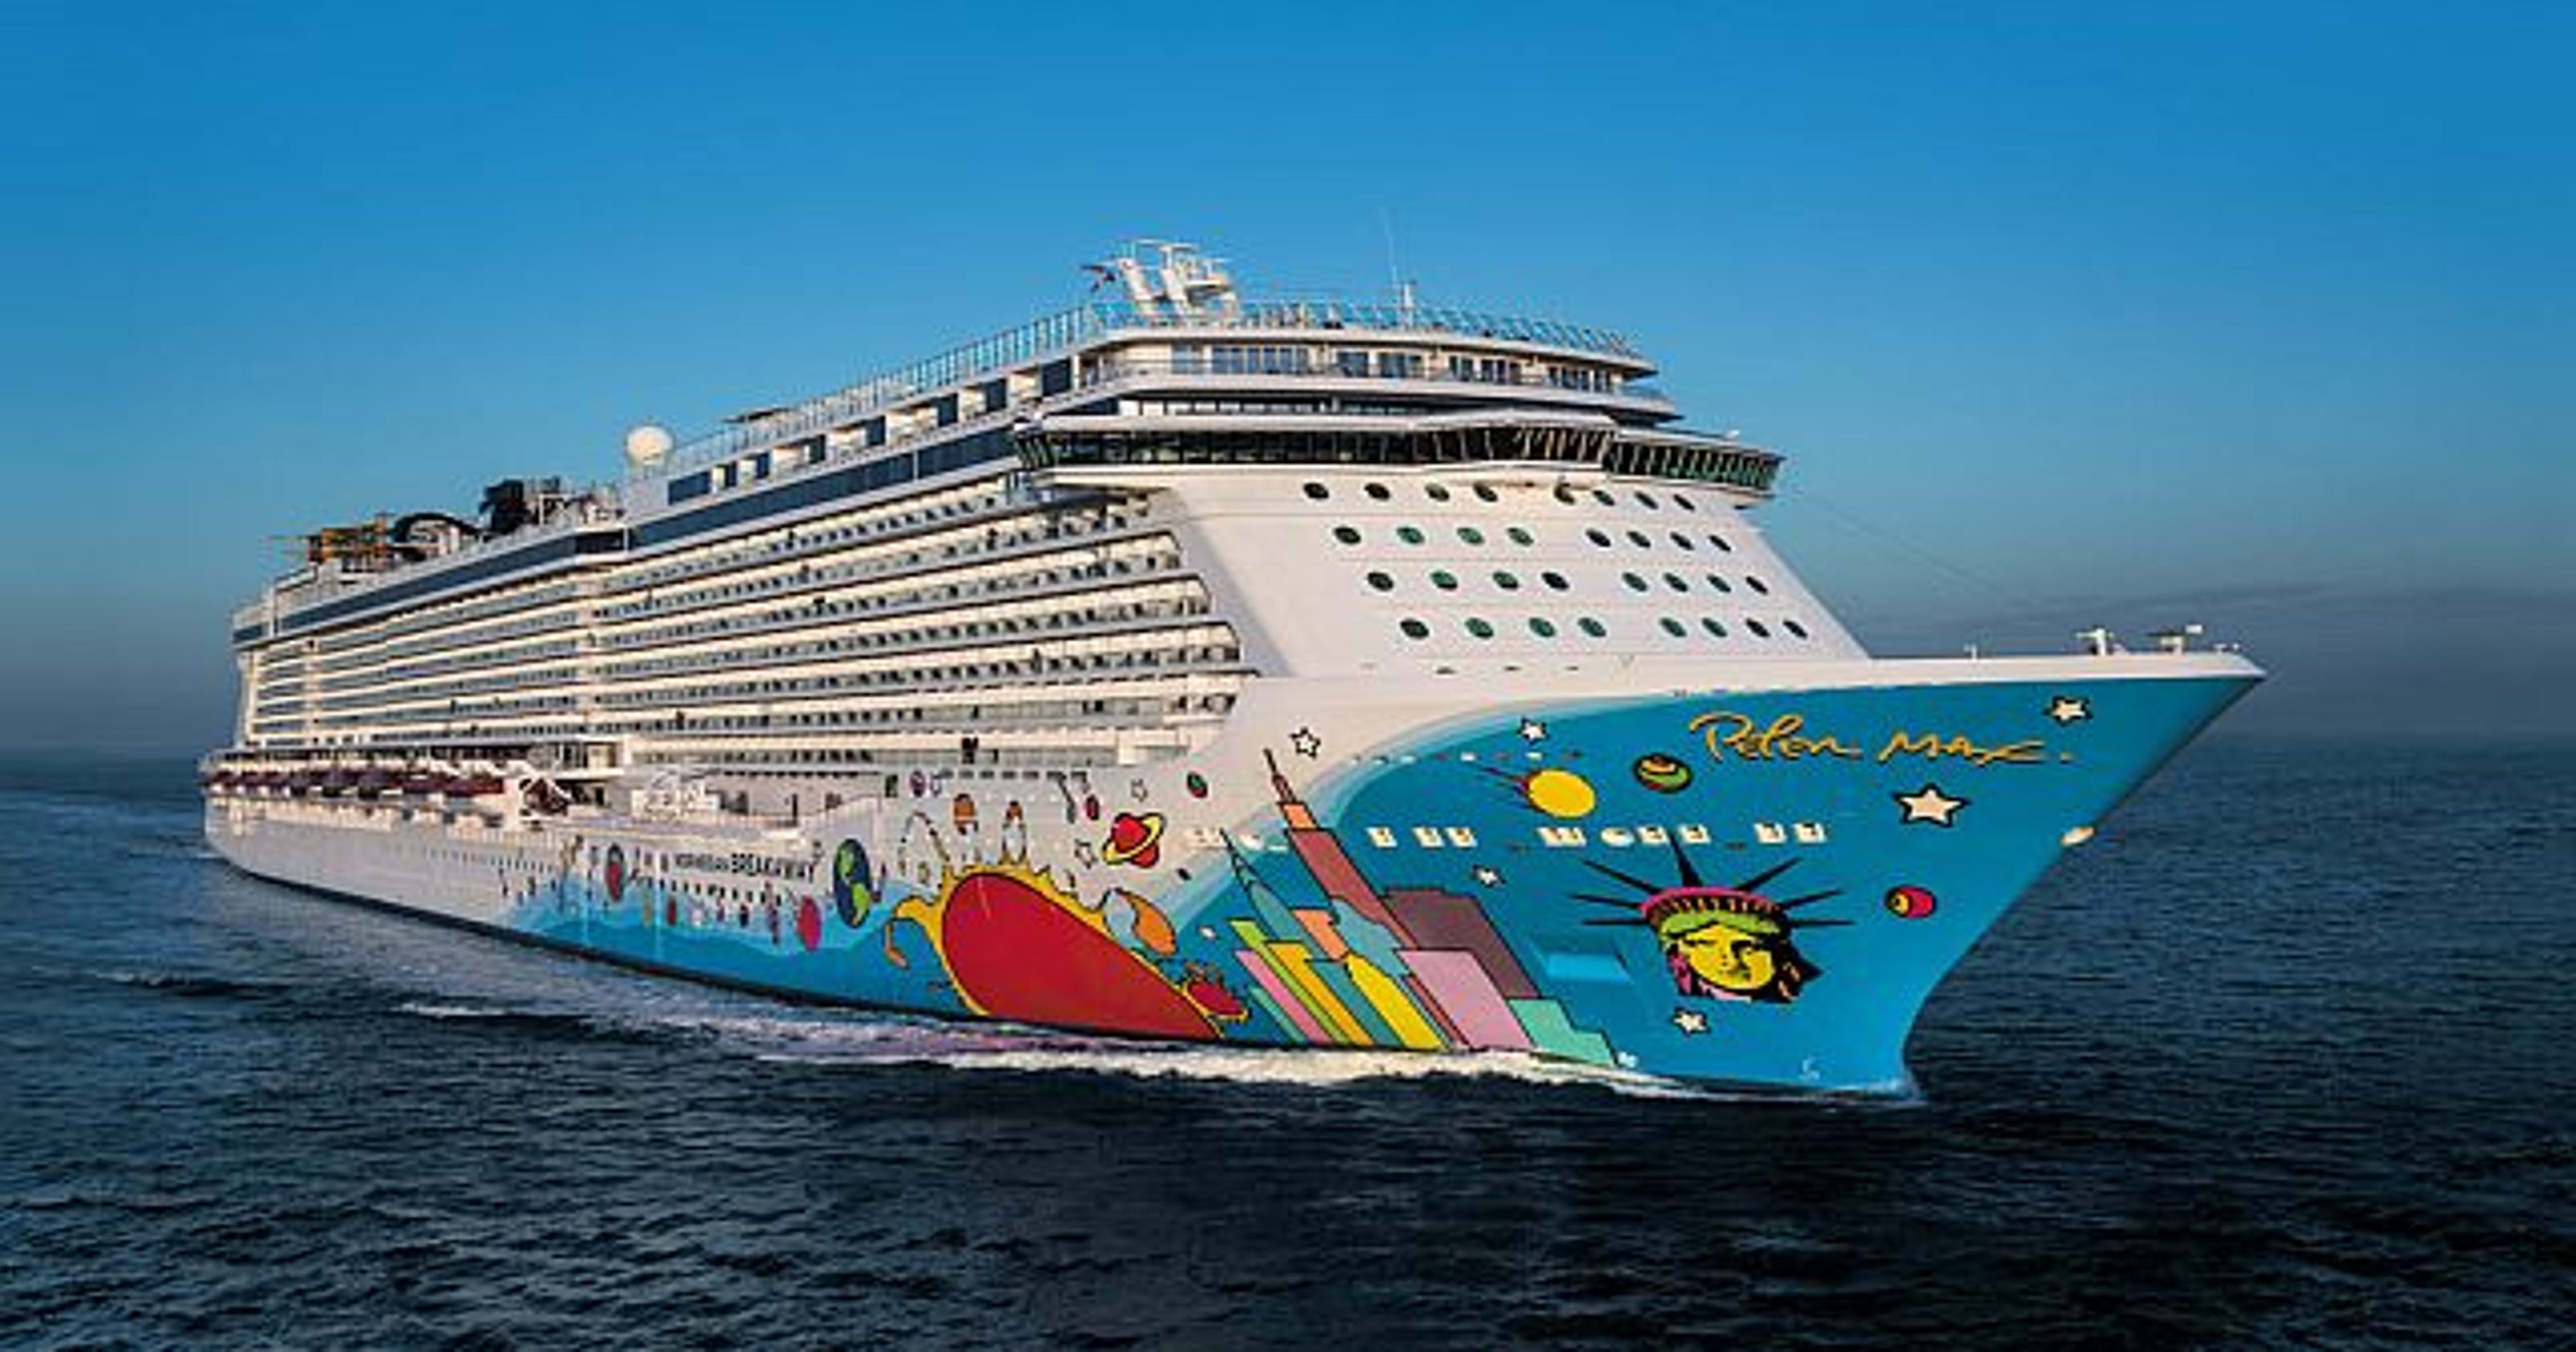 photo-tour-the-allure-of-a-norwegian-cruise-line-ship